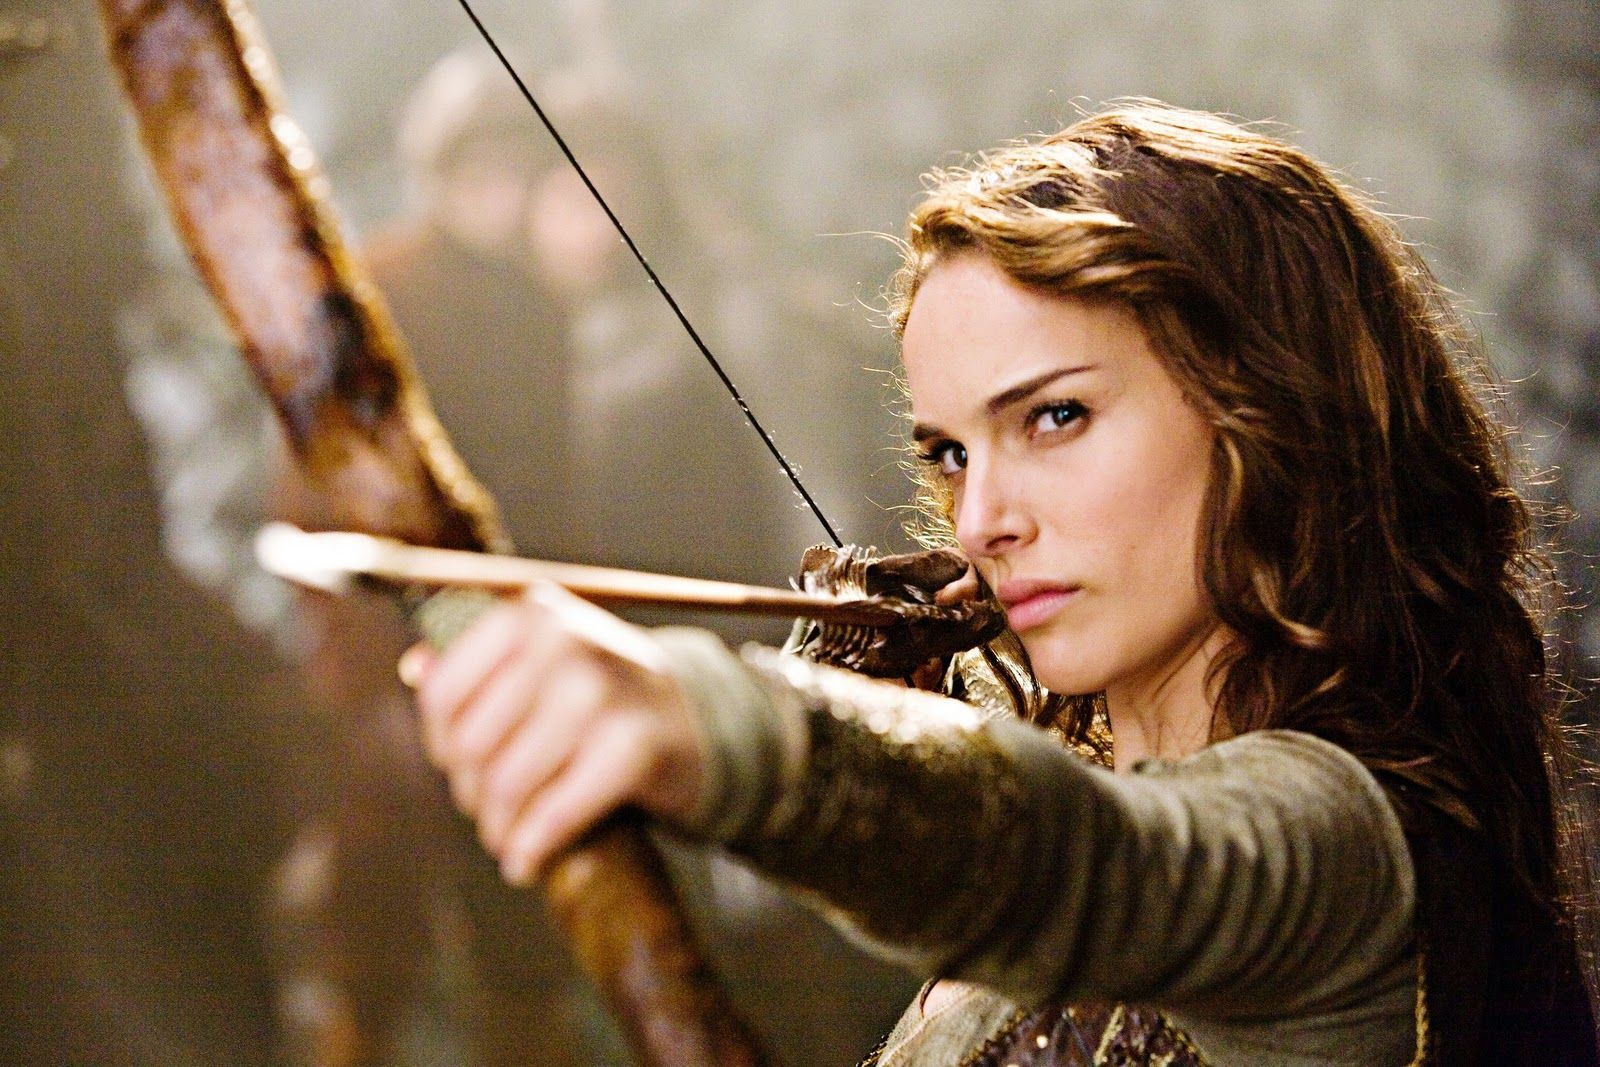 Girl With Bow And Arrows Wallpapers - Wallpaper Cave